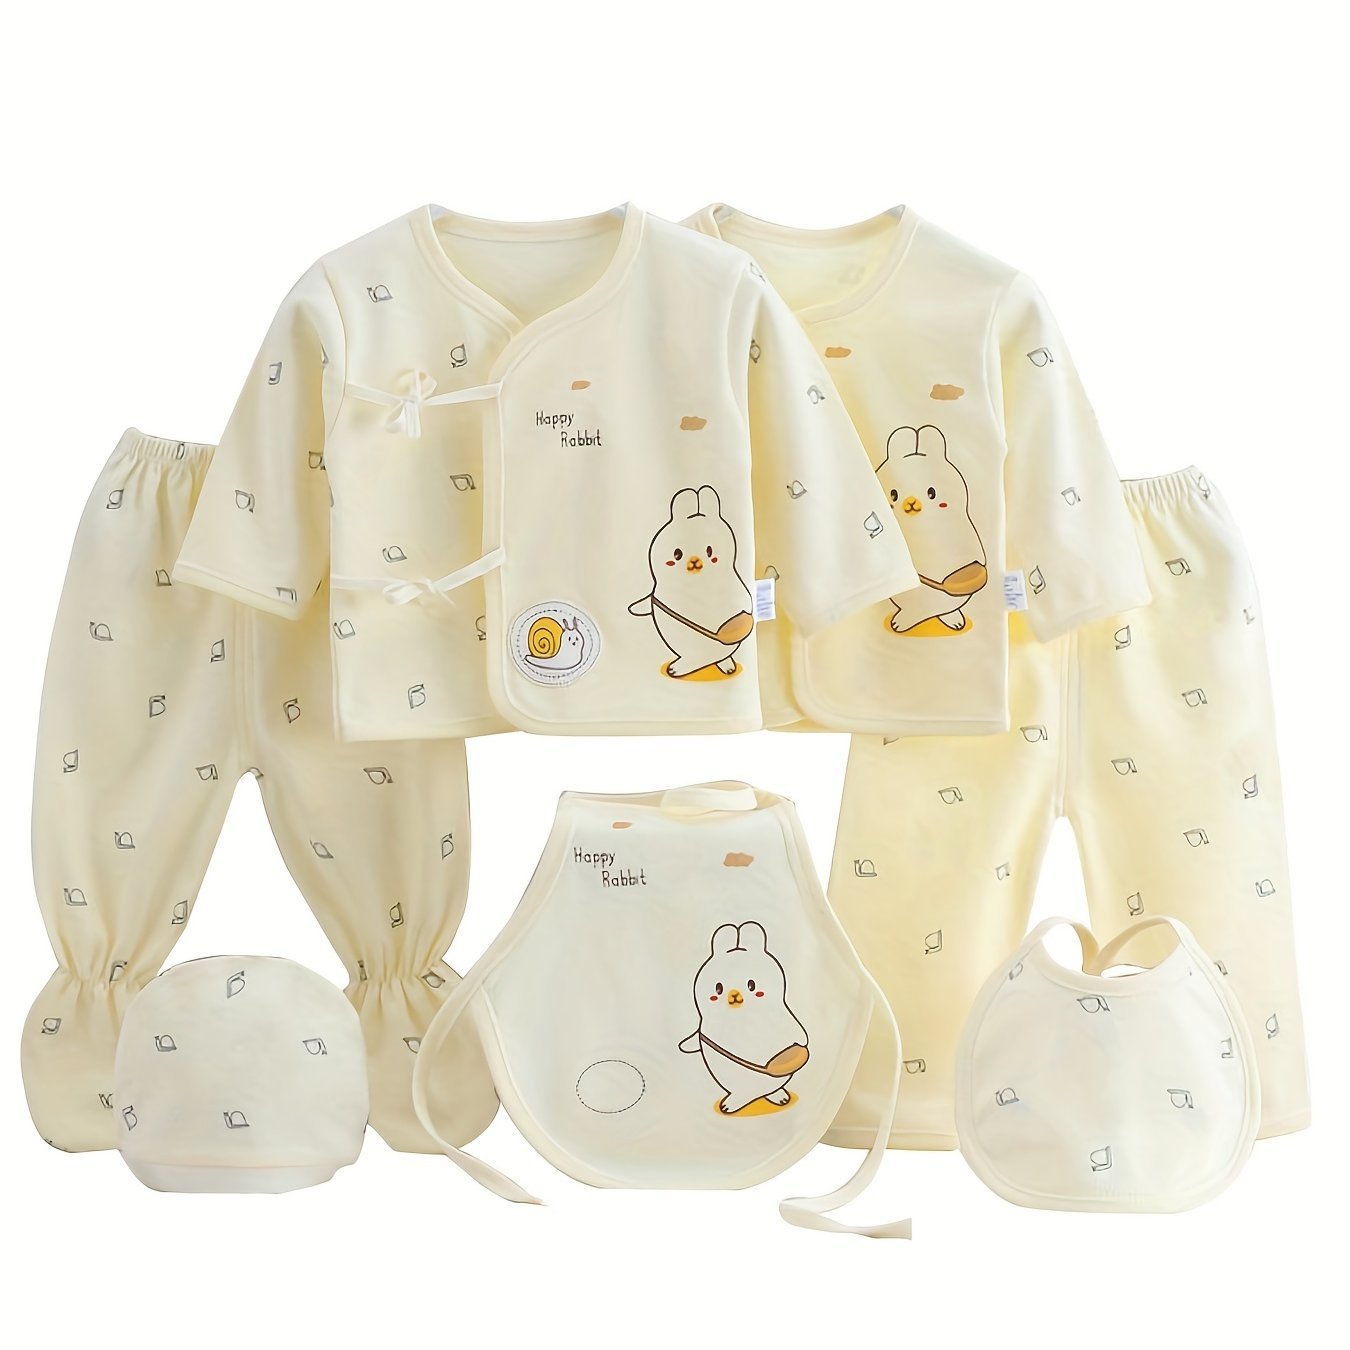 7pcs Newborn Comfort Set - Adorable Unisex Cotton Outfit with Footed Pants, Cardigan, Top, Trousers, Hat, Bib - Perfect Gift for Baby Showers - Ammpoure Wellbeing